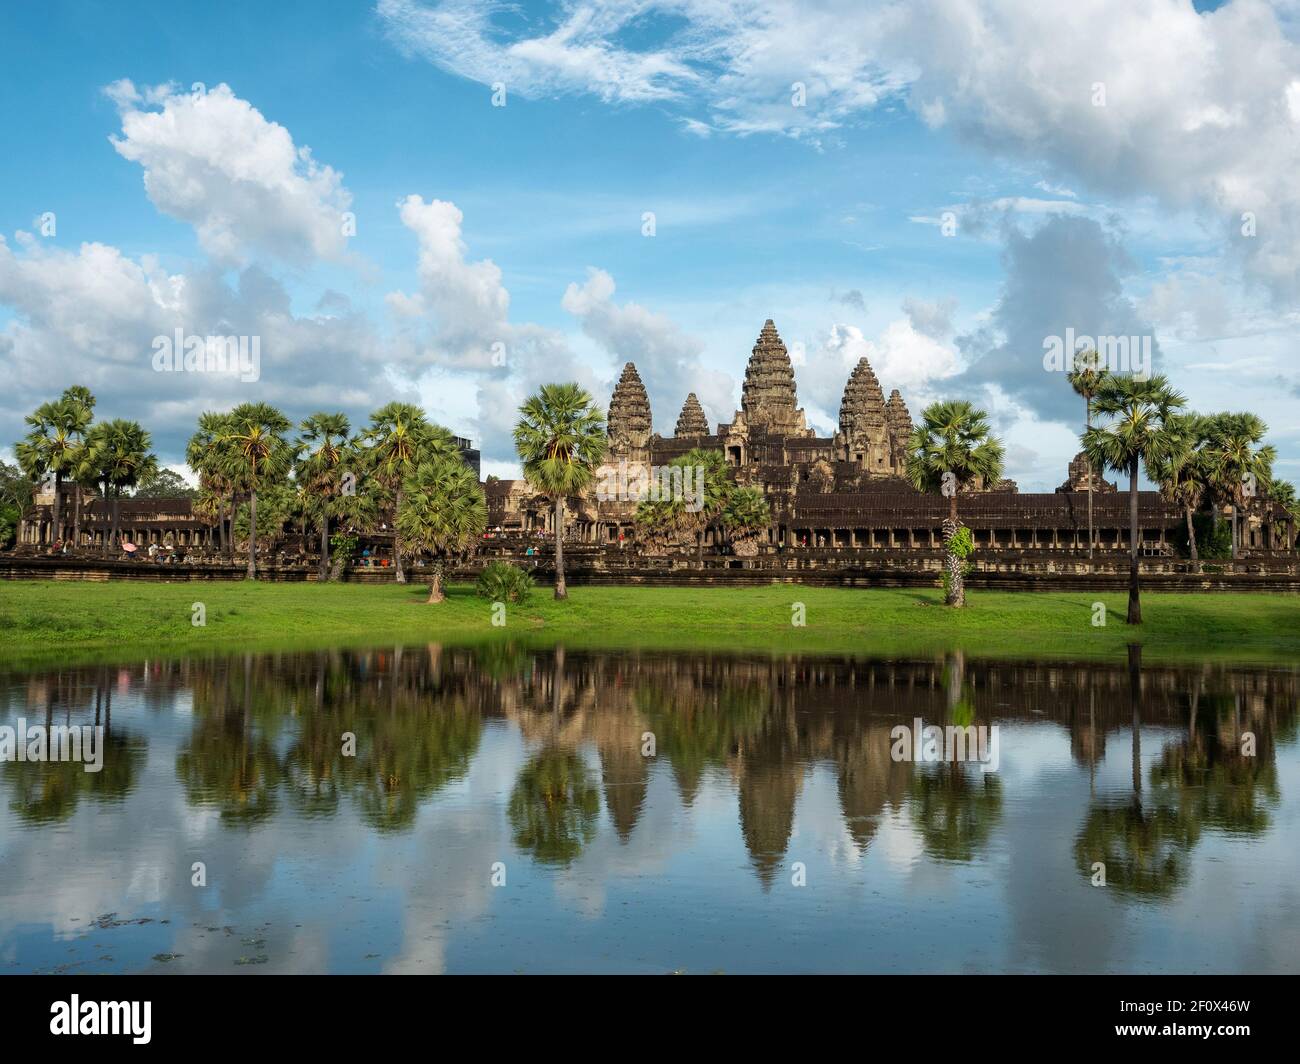 Ancient ruins of Angkor Wat temple in Siem Reap, Cambodia. Stock Photo